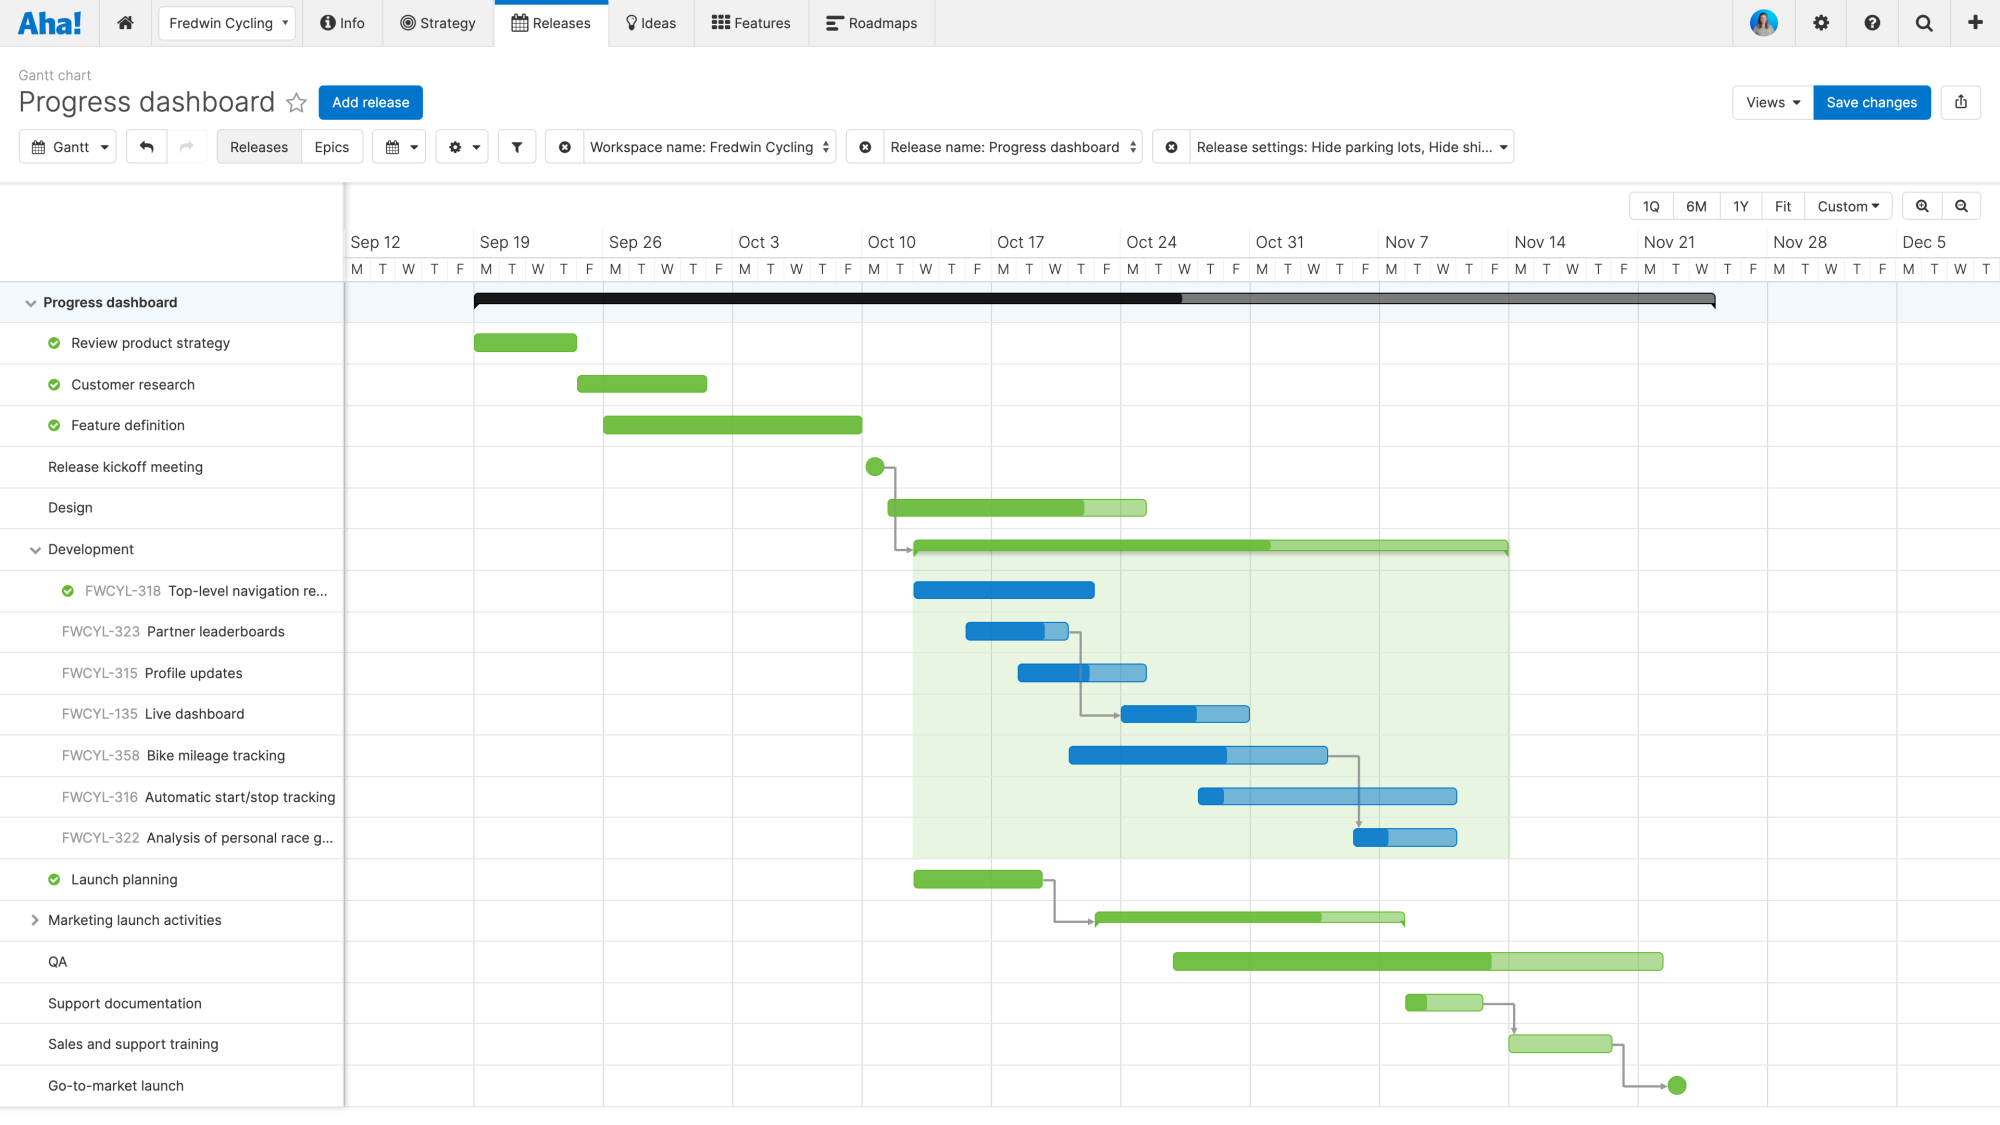 Track progress on roadmaps in Aha! as features are completed in Pivotal Tracker.